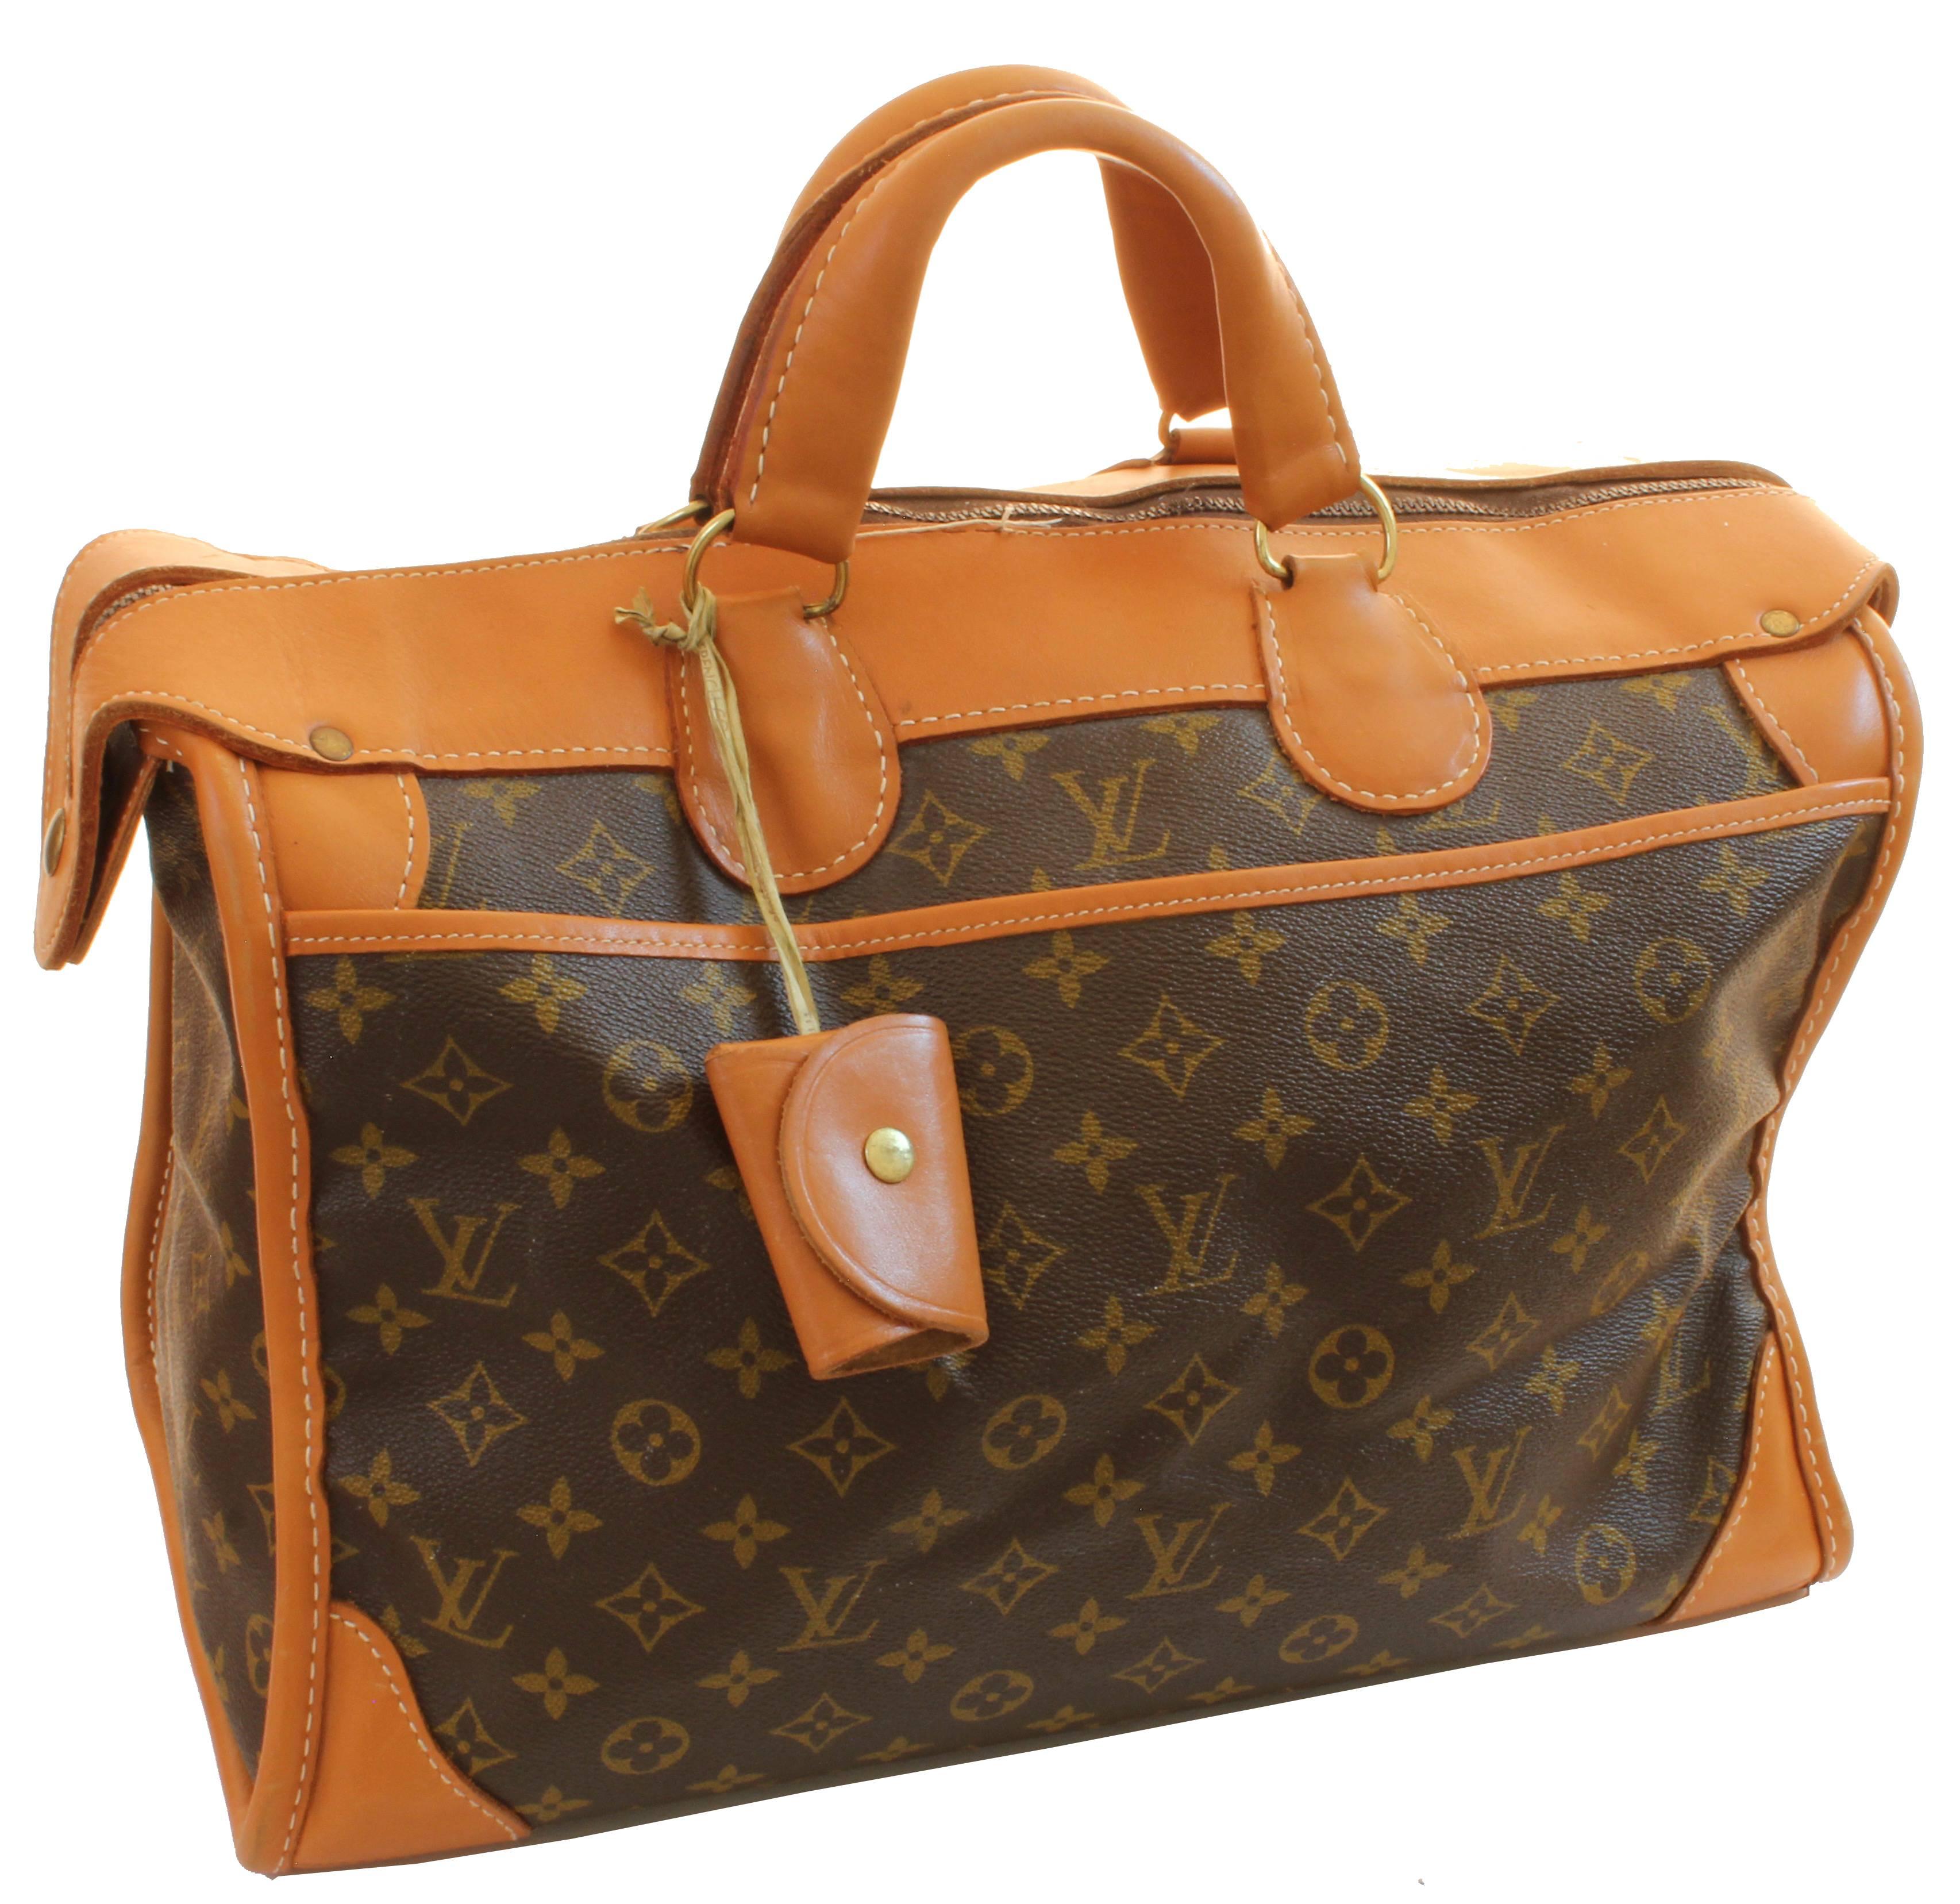 Louis Vuitton Monogram Tote Bag Carry On Keepall Luggage French Company 70s 